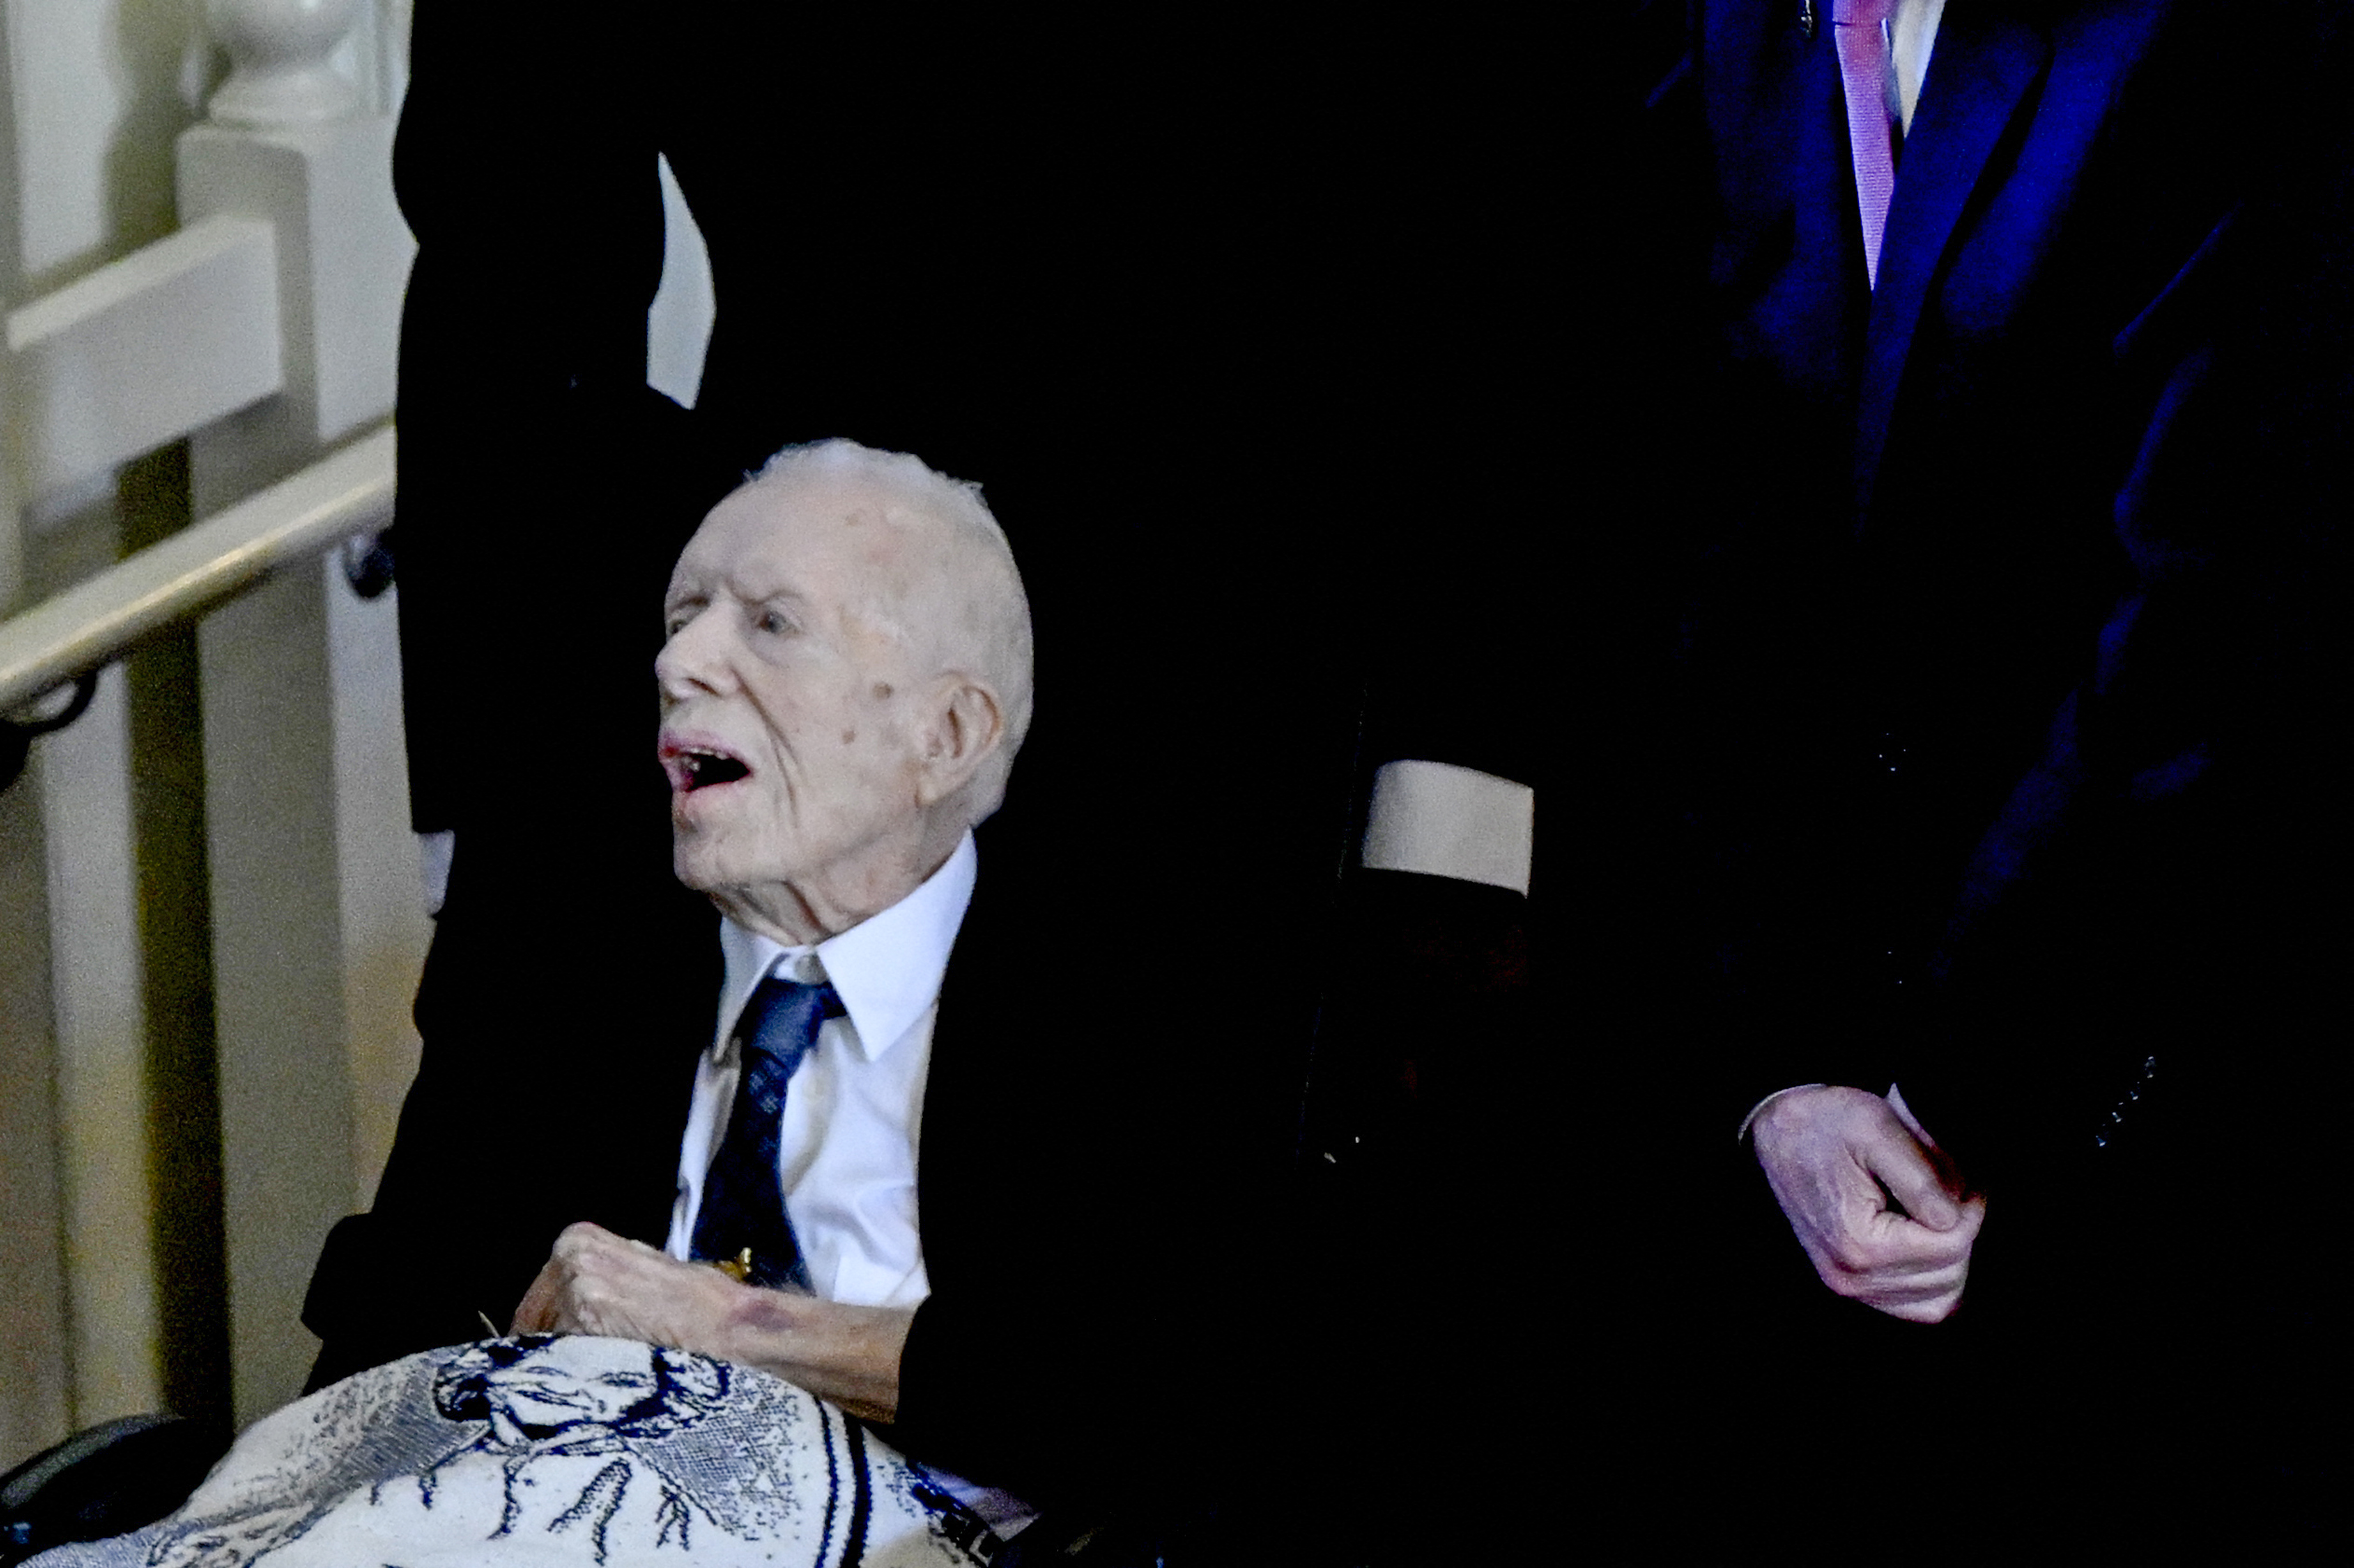 Former U.S. President Jimmy Carter at his late wife's memorial service in Atlanta, Georgia on November 28, 2023 | Source: Getty Images